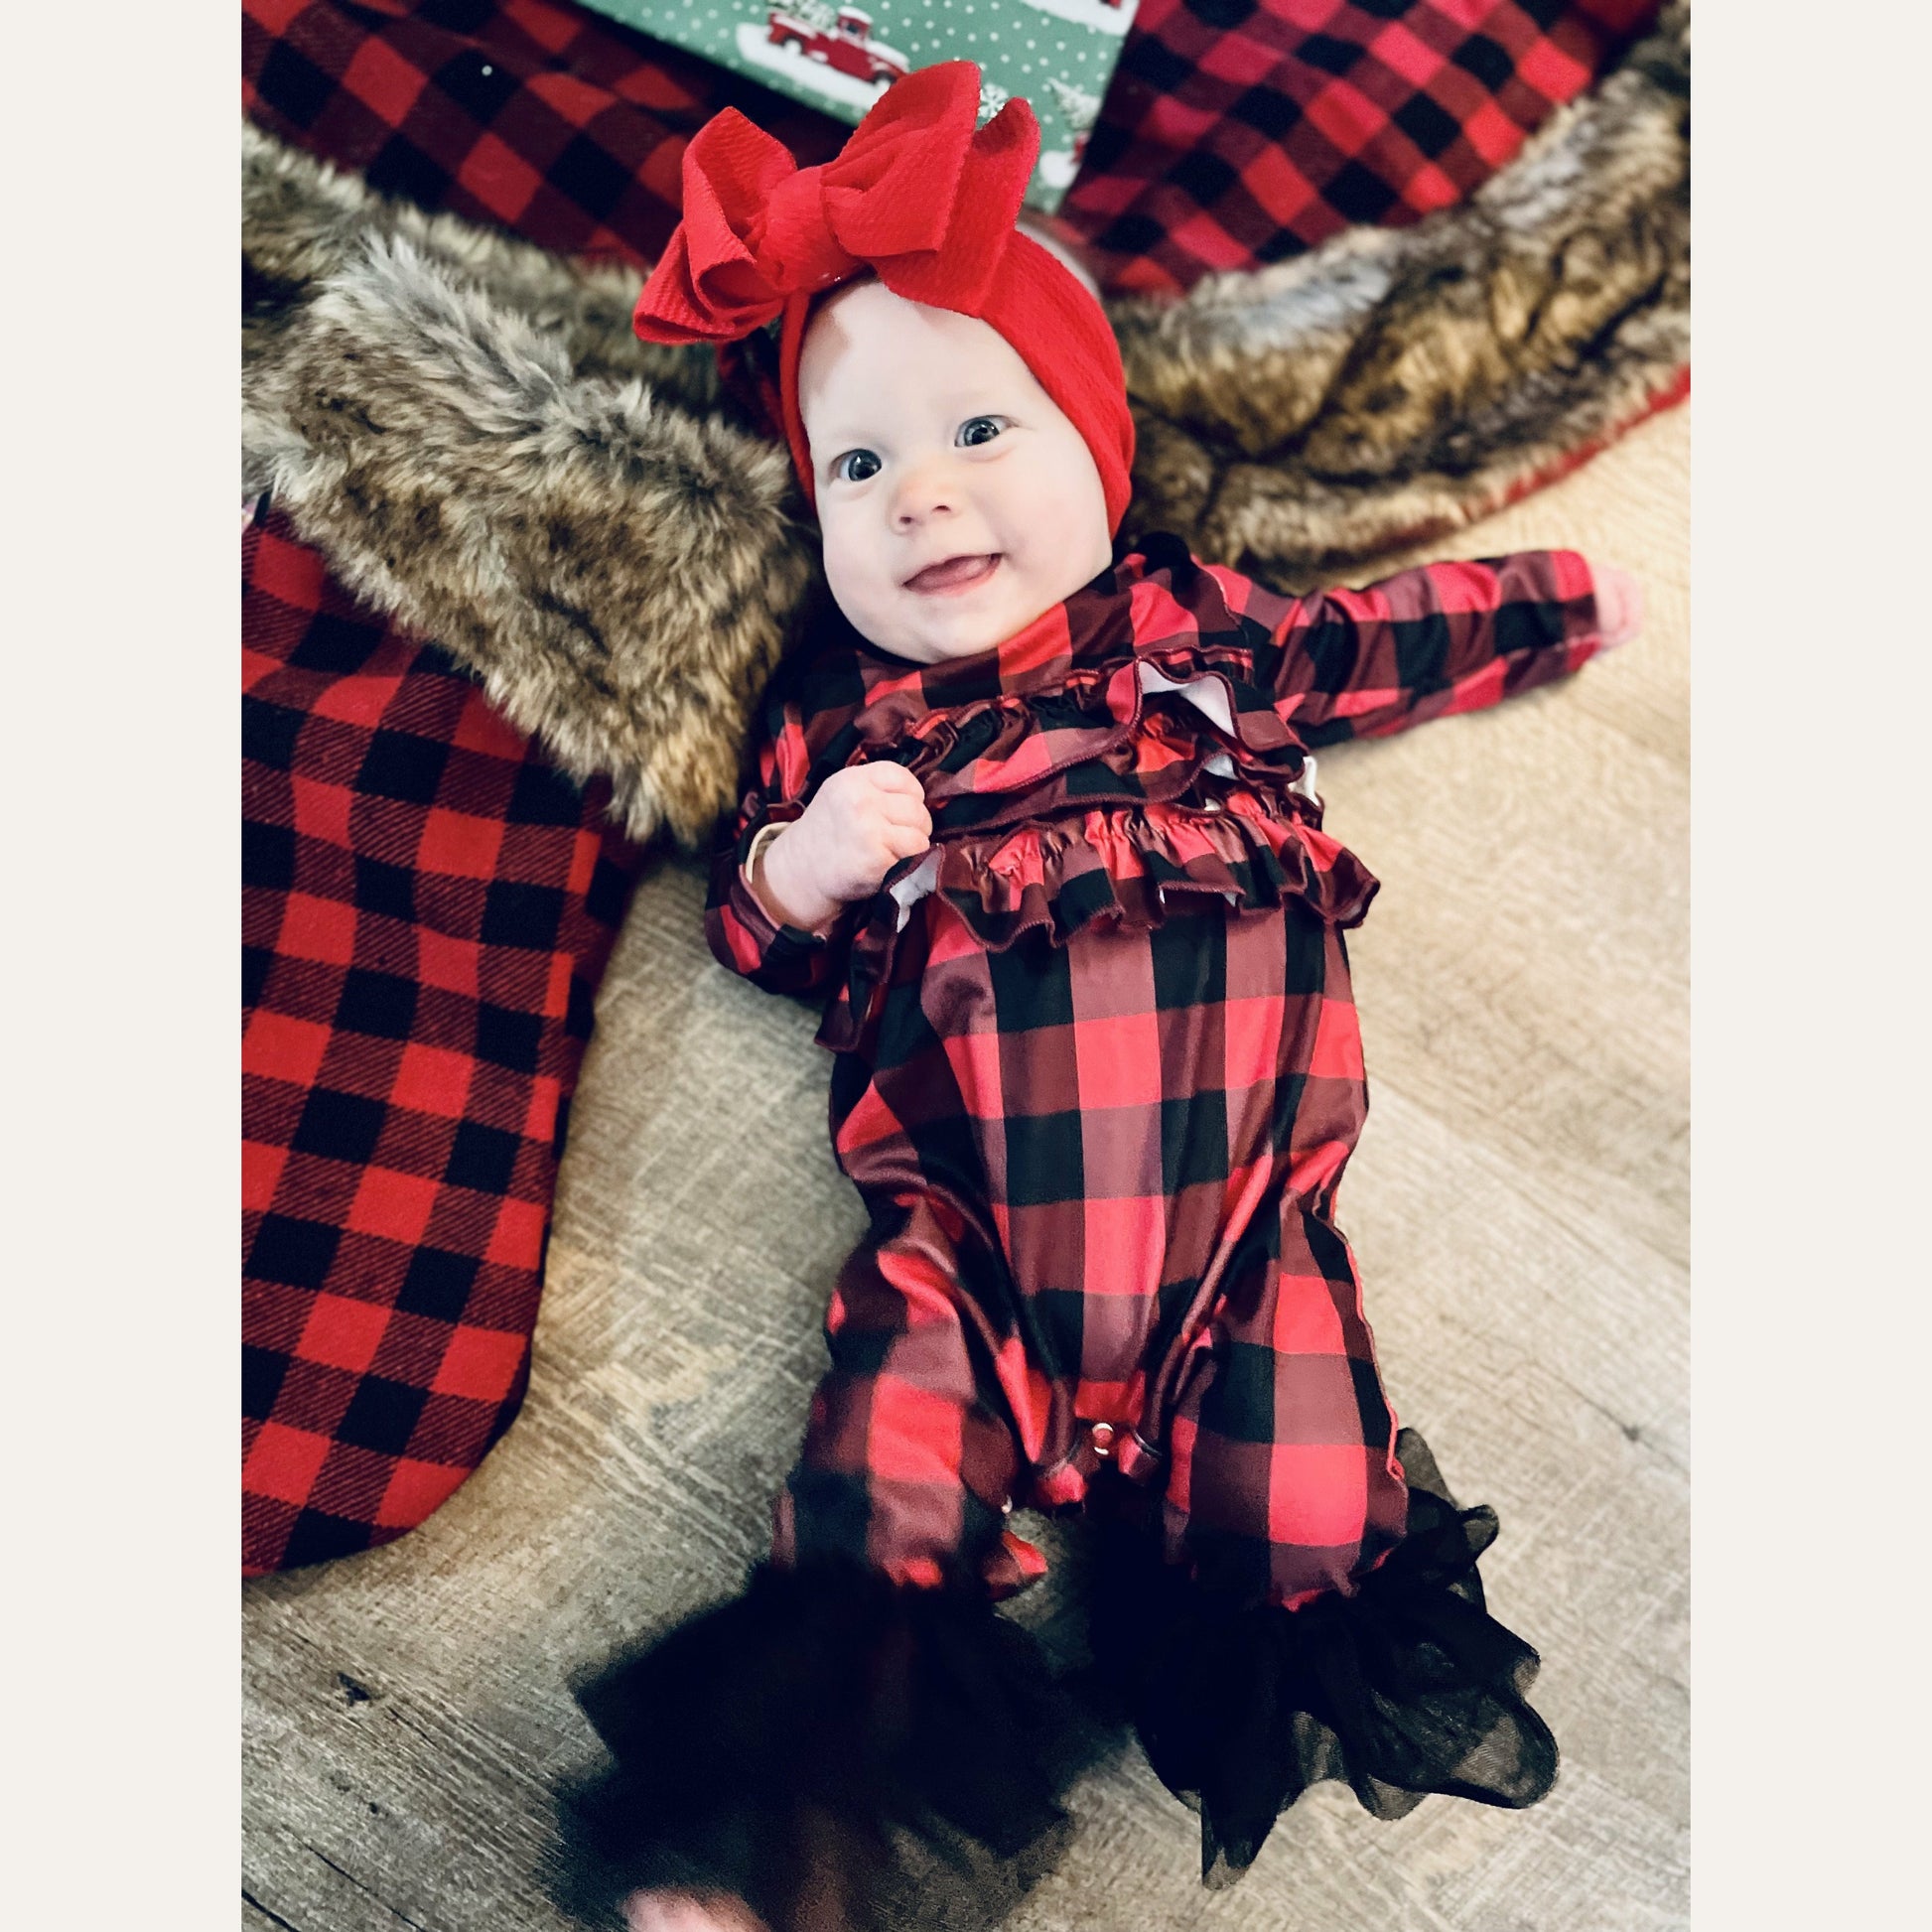                                        Ruffle Buffalo Plaid Romper  You can never have too much buffalo plaid! This romper is extra cute with the ruffles on the body and tulle ruffles at the feet!   Fits true to size. Polyester.